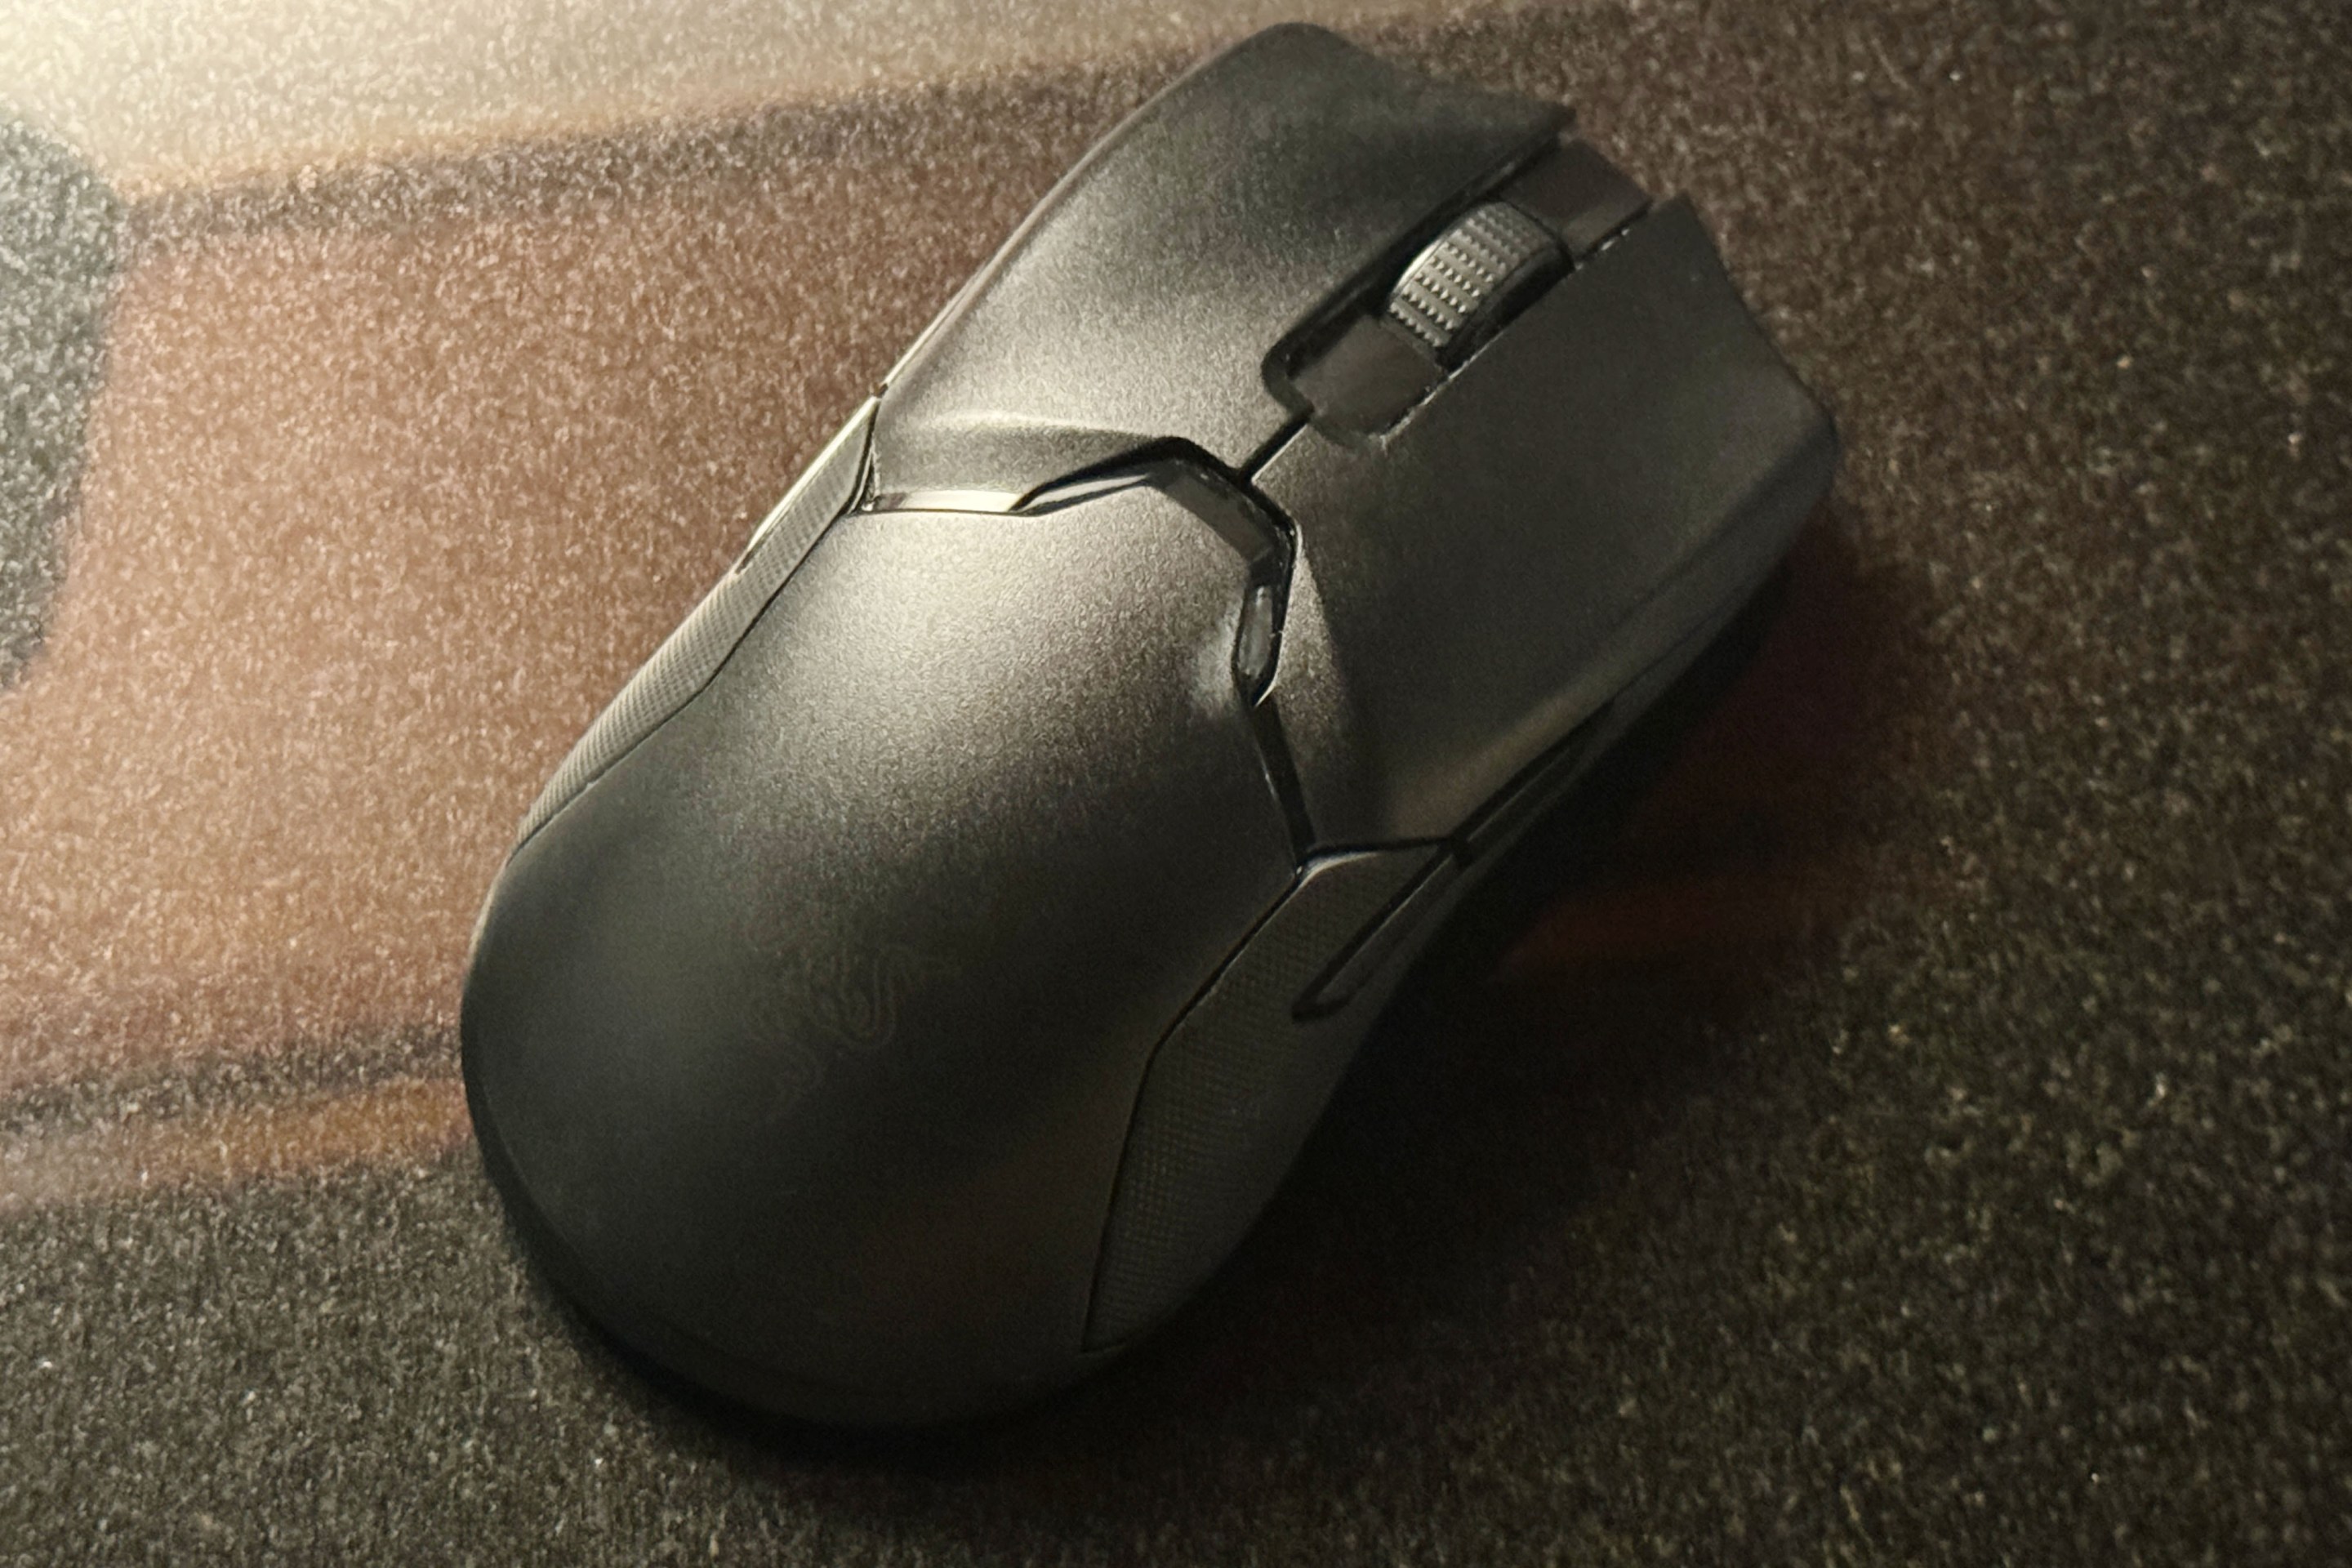 An image of a perfectly fine mouse.